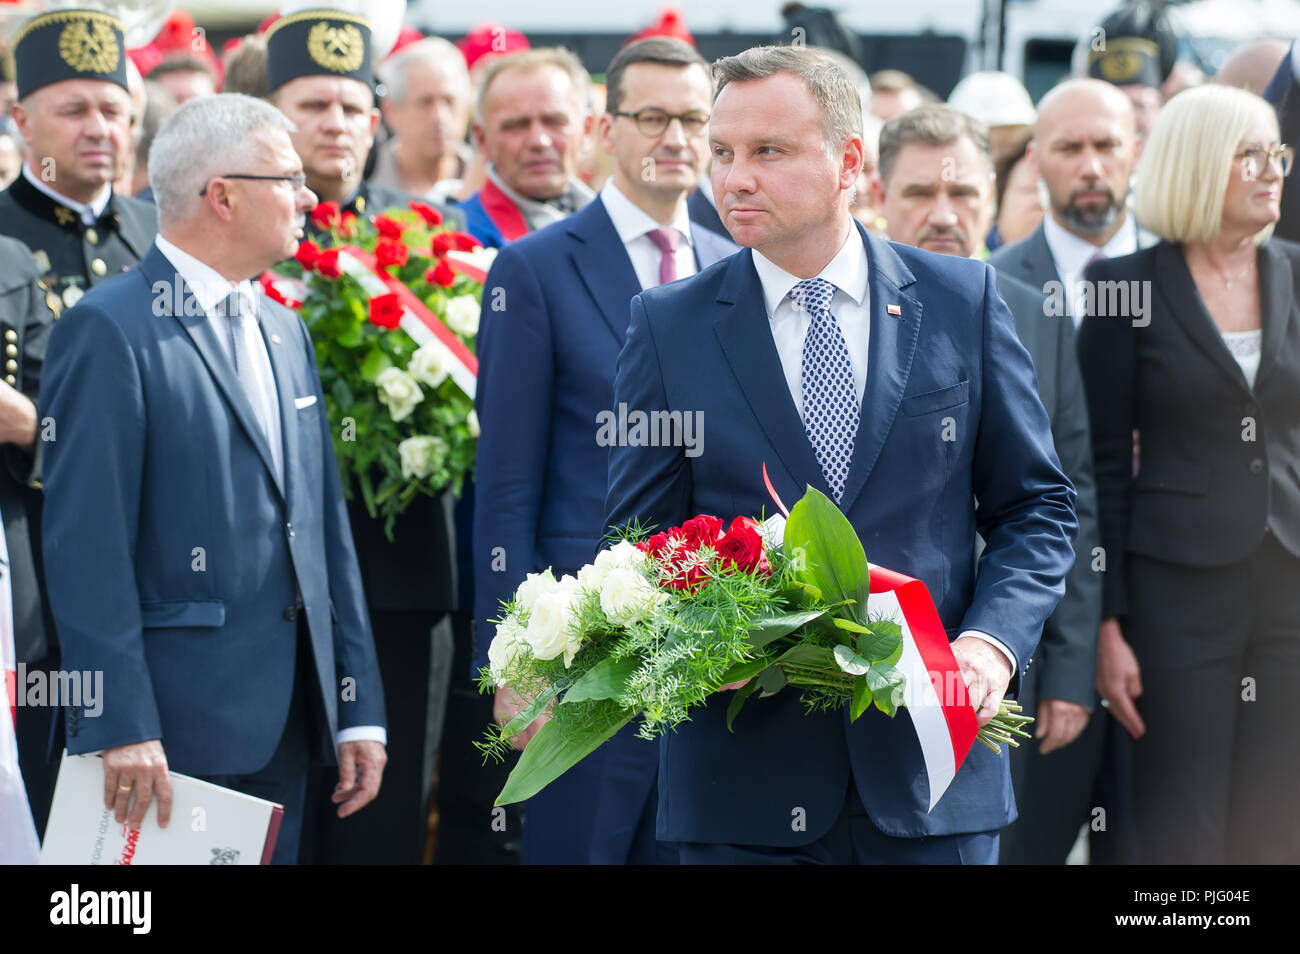 Andrzej Duda, President of Poland, and Mateusz Morawiecki, Prime Minister of Poland, during 38th anniversary of Gdansk Agreement in Gdansk, Poland. Au Stock Photo